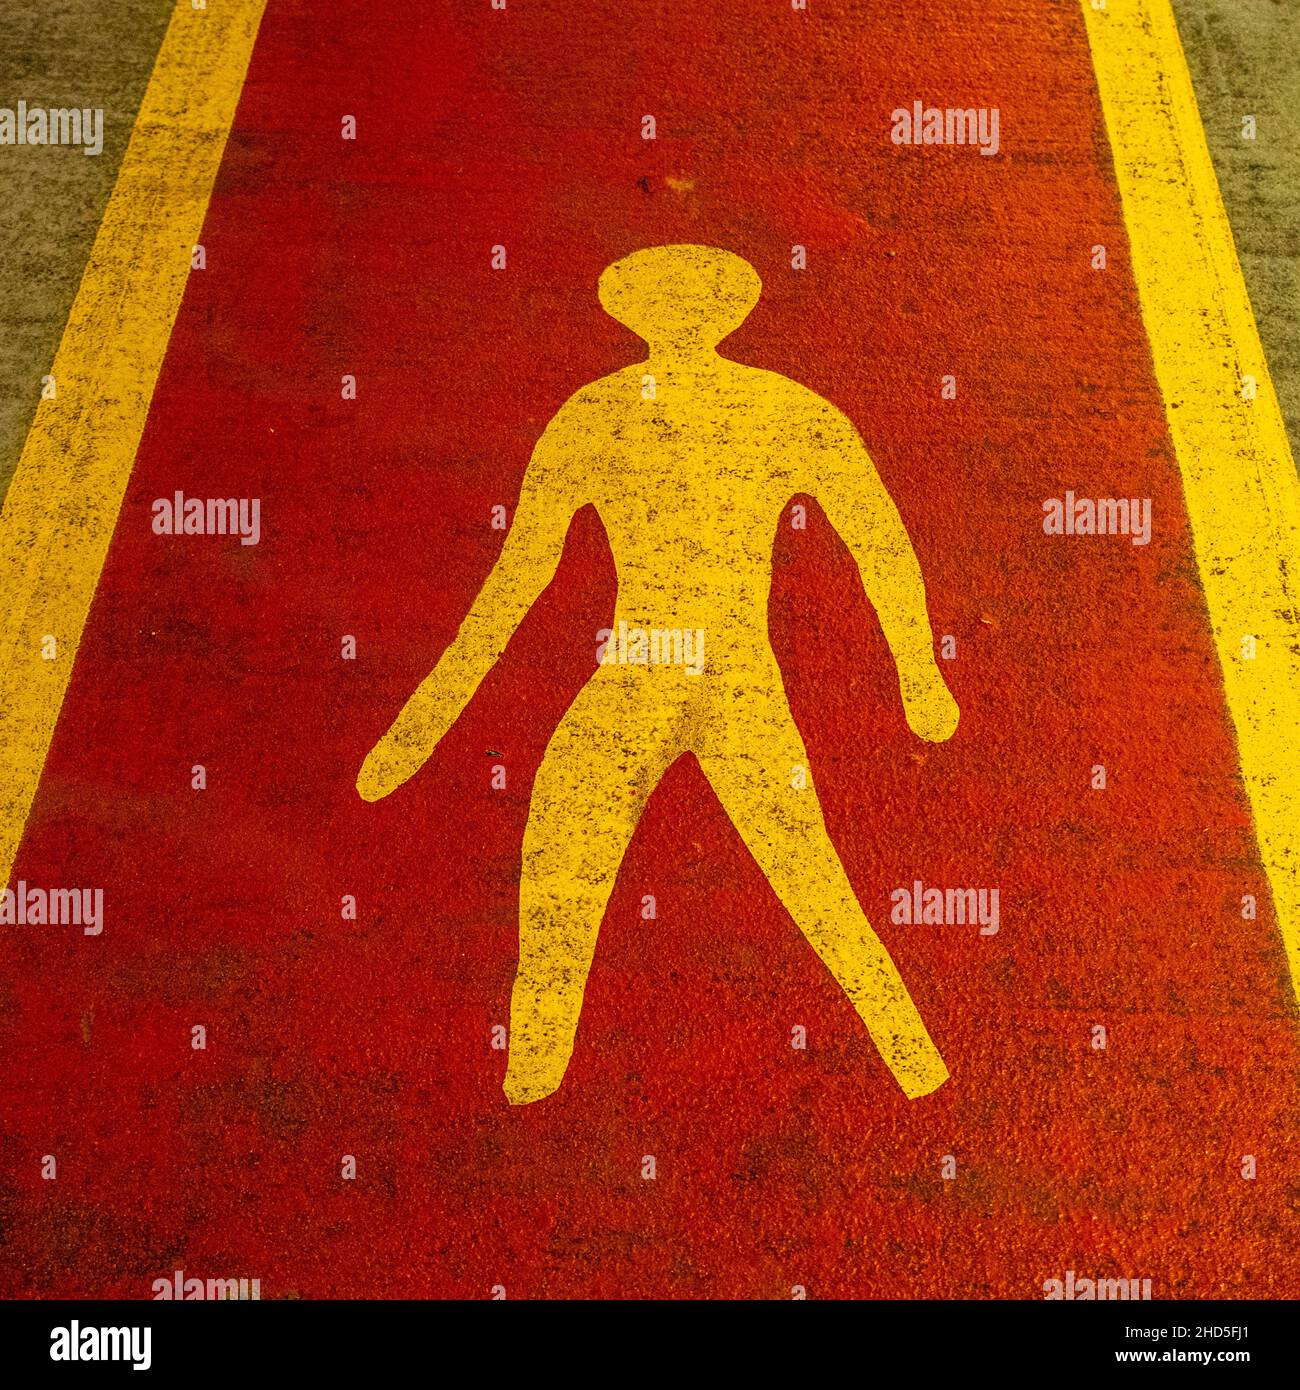 Epsom Surrey UK January 02 2022, Painted Floor Marking Is A Public Car Park With No People Stock Photo